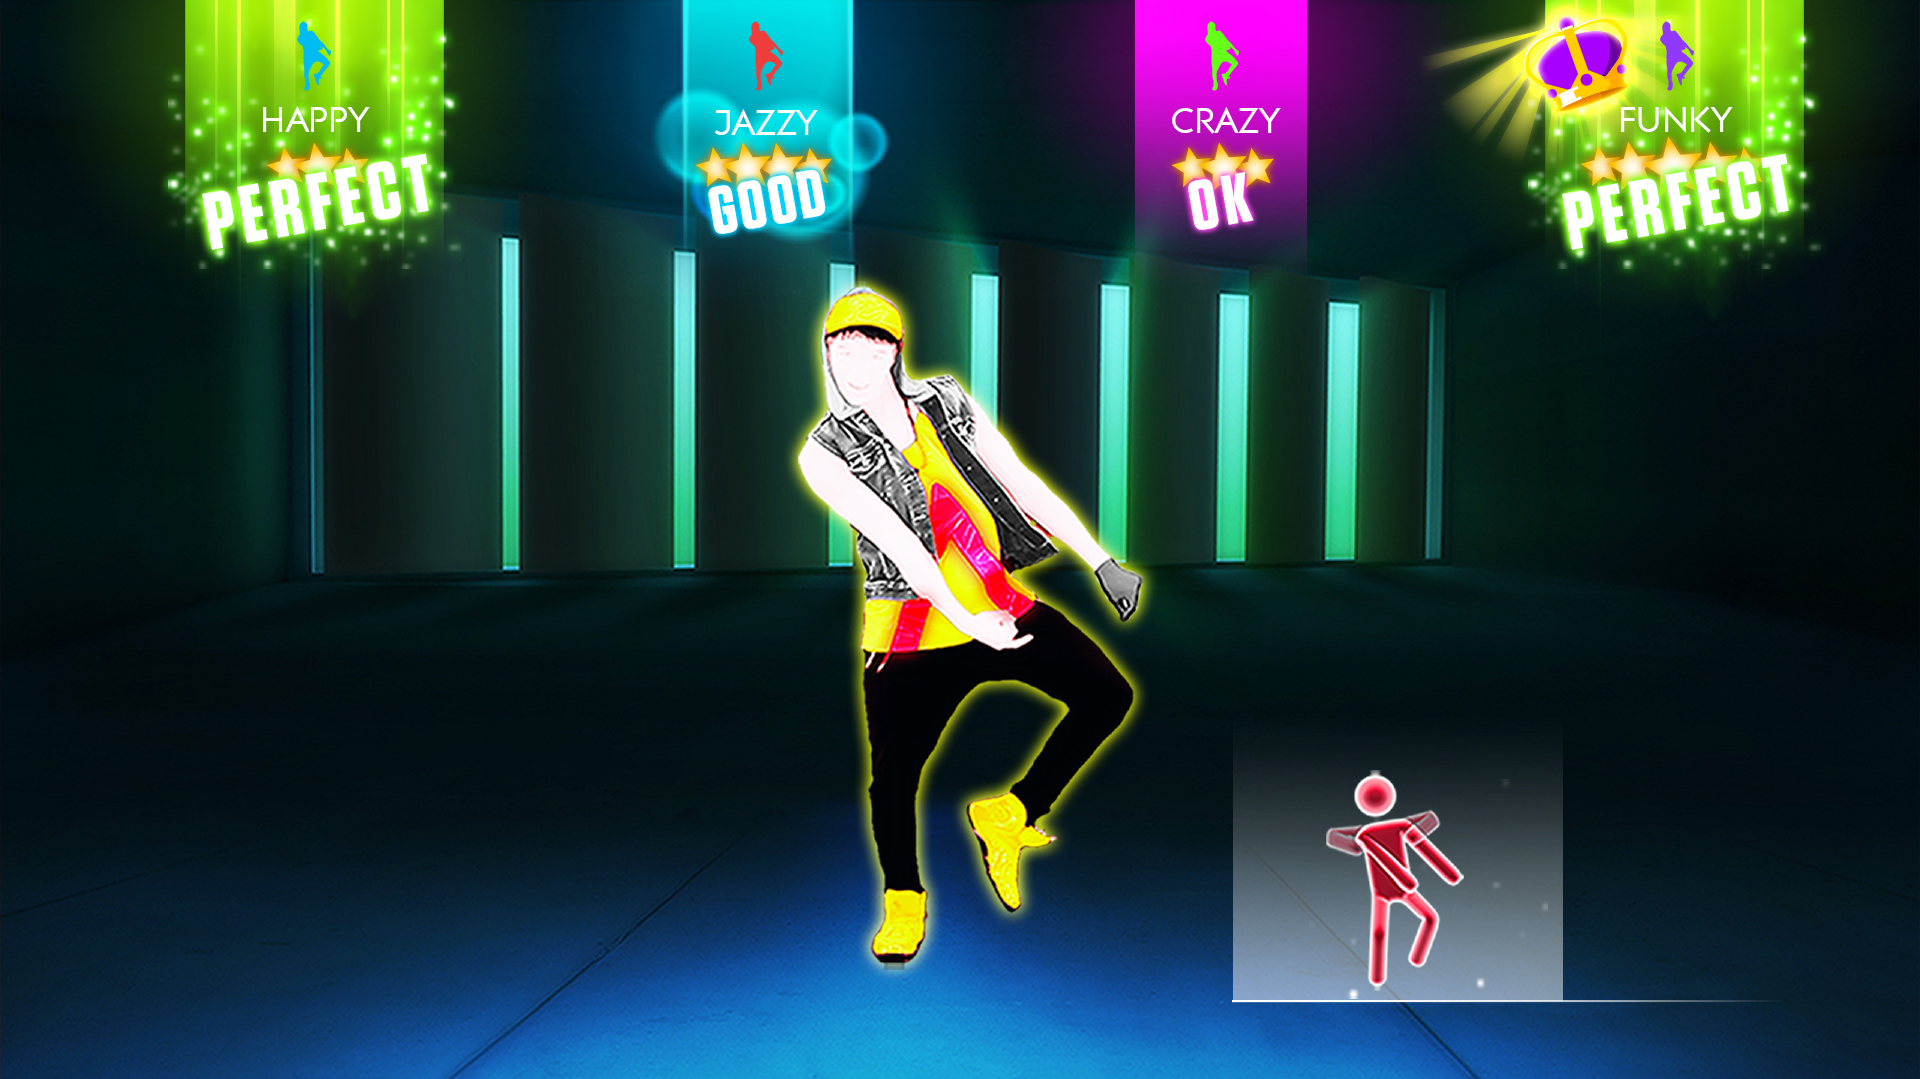 free download 2012 just dance